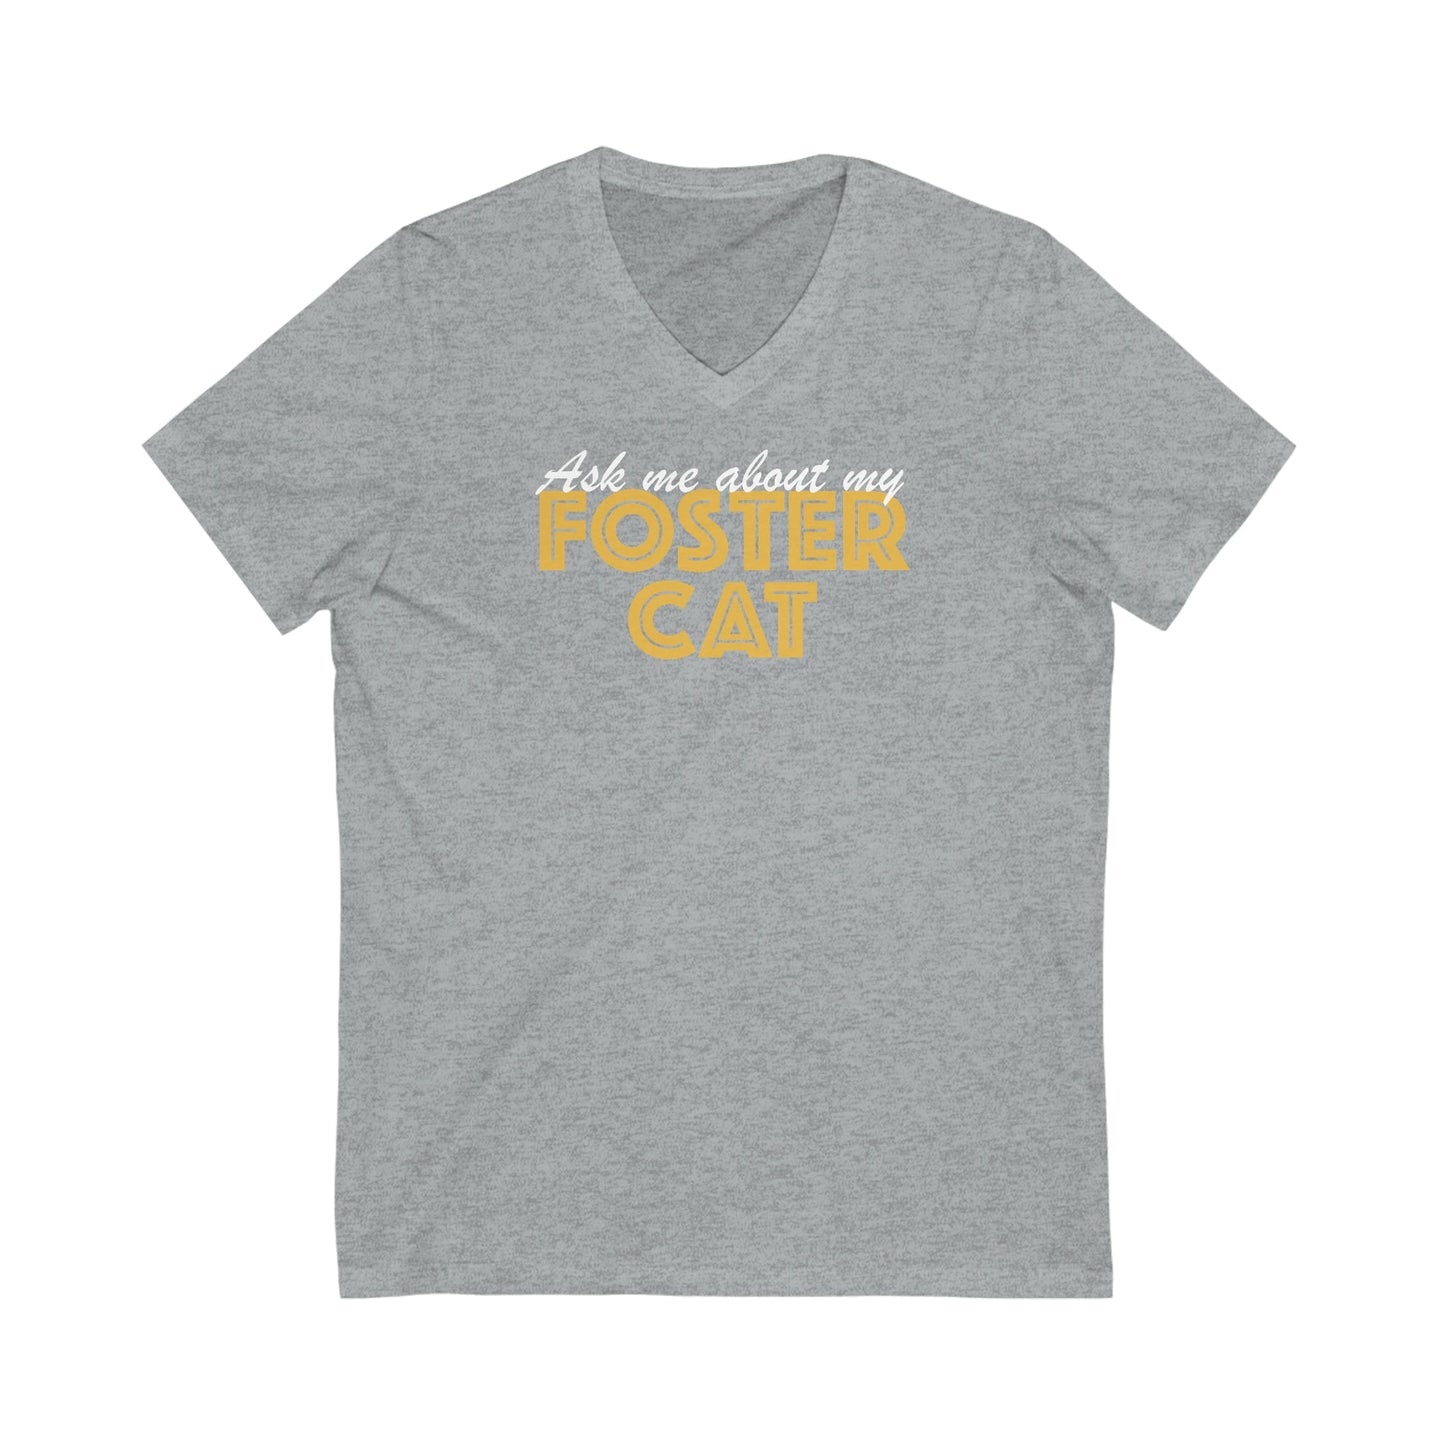 Ask Me About My Foster Cat | Unisex V-Neck Tee - Detezi Designs-29587699105933484853